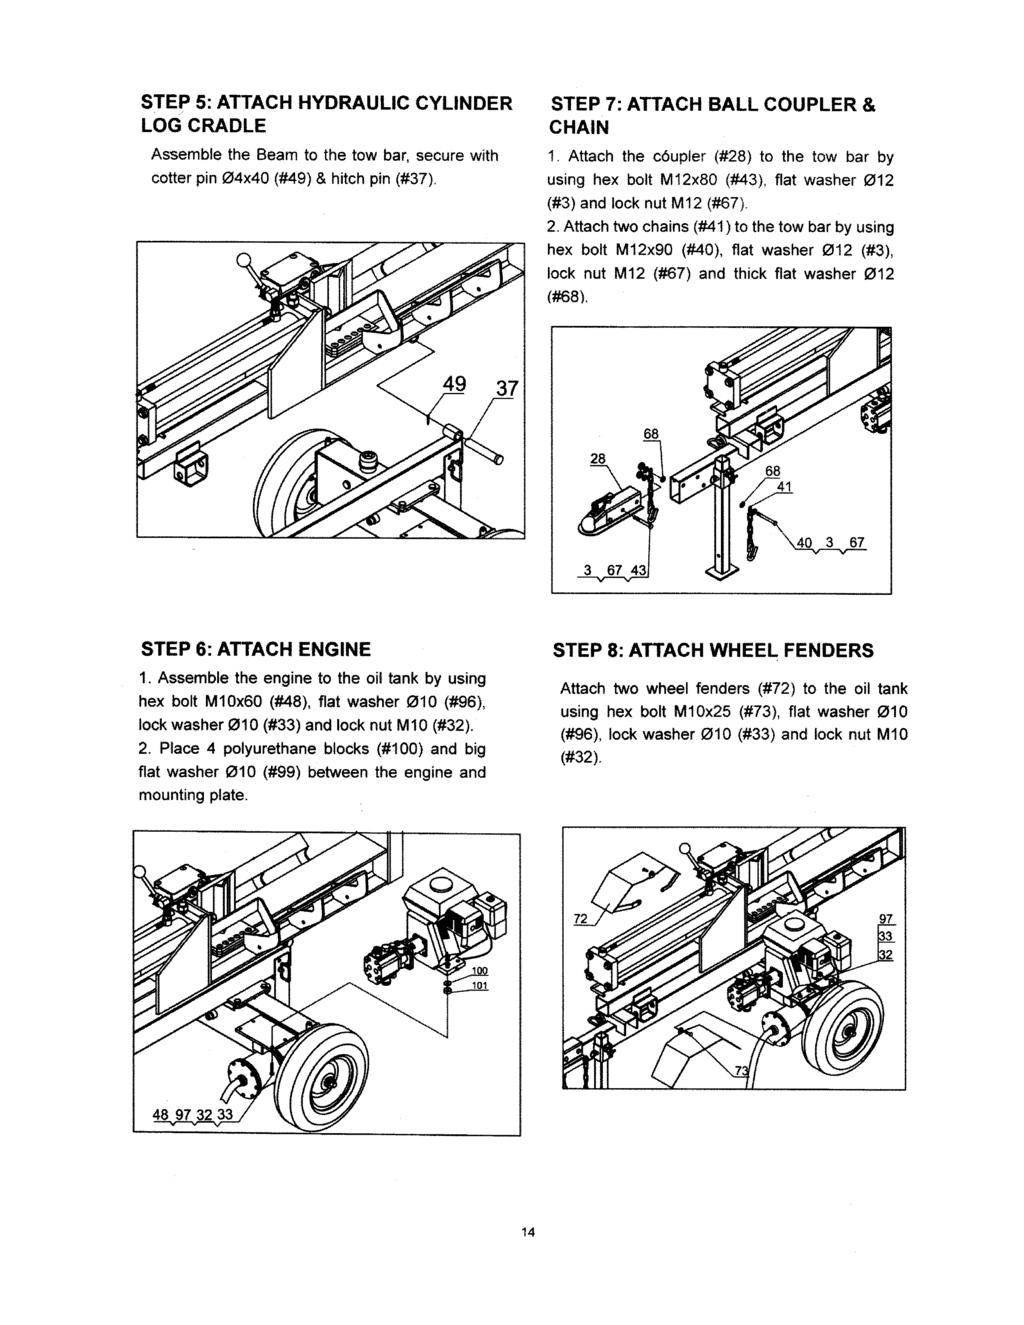 STEP 5: ATTACH HYDRAULIC CYLINDER LOGCRADLE Assemble the Beam to the tow bar, secure with cotter pin O4x40 (#49) & hitch pin (#37).!.p STEP 7: ATTACH BALL COUPLER & CHAIN.